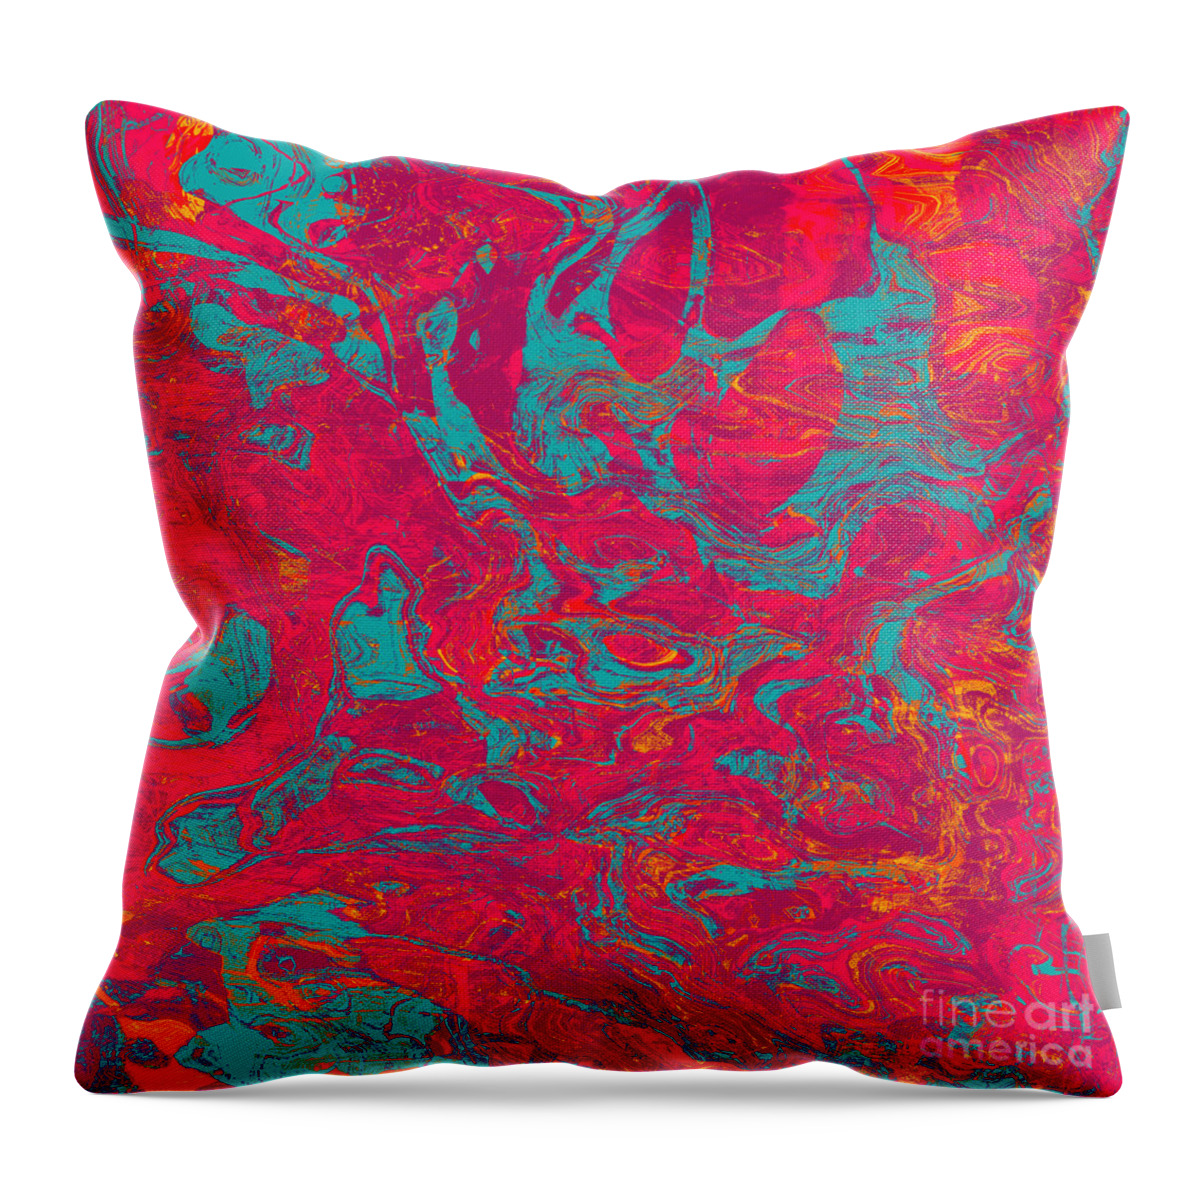 Abstract Throw Pillow featuring the digital art 0217 Abstract Thought by Chowdary V Arikatla